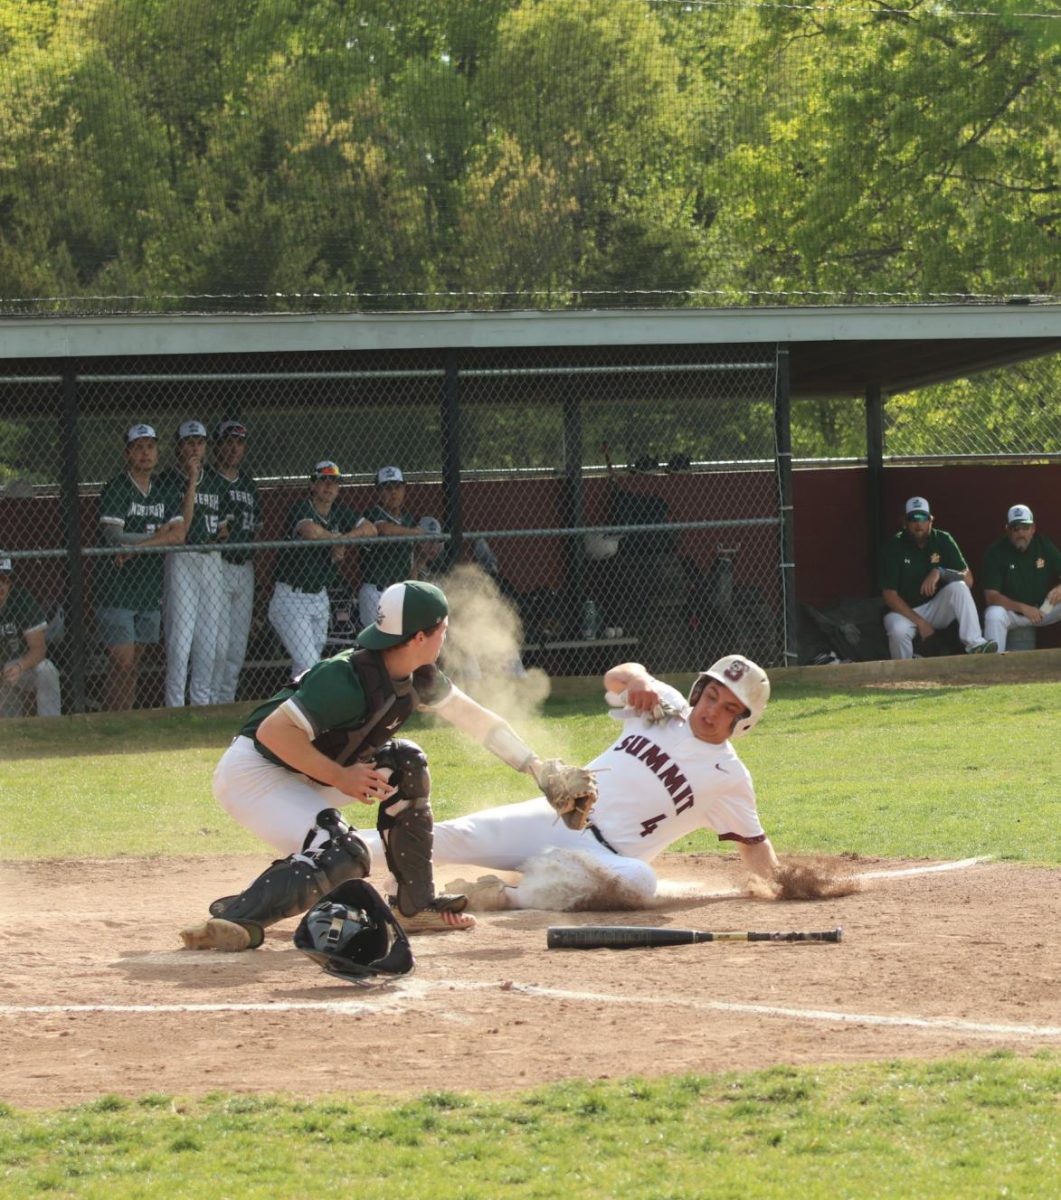 While running to home base, junior Gabe Sieve is forced to slide in order to avoid being tagged by the catcher. After controversy over the play,
the umpire made the call that Sieve was out.